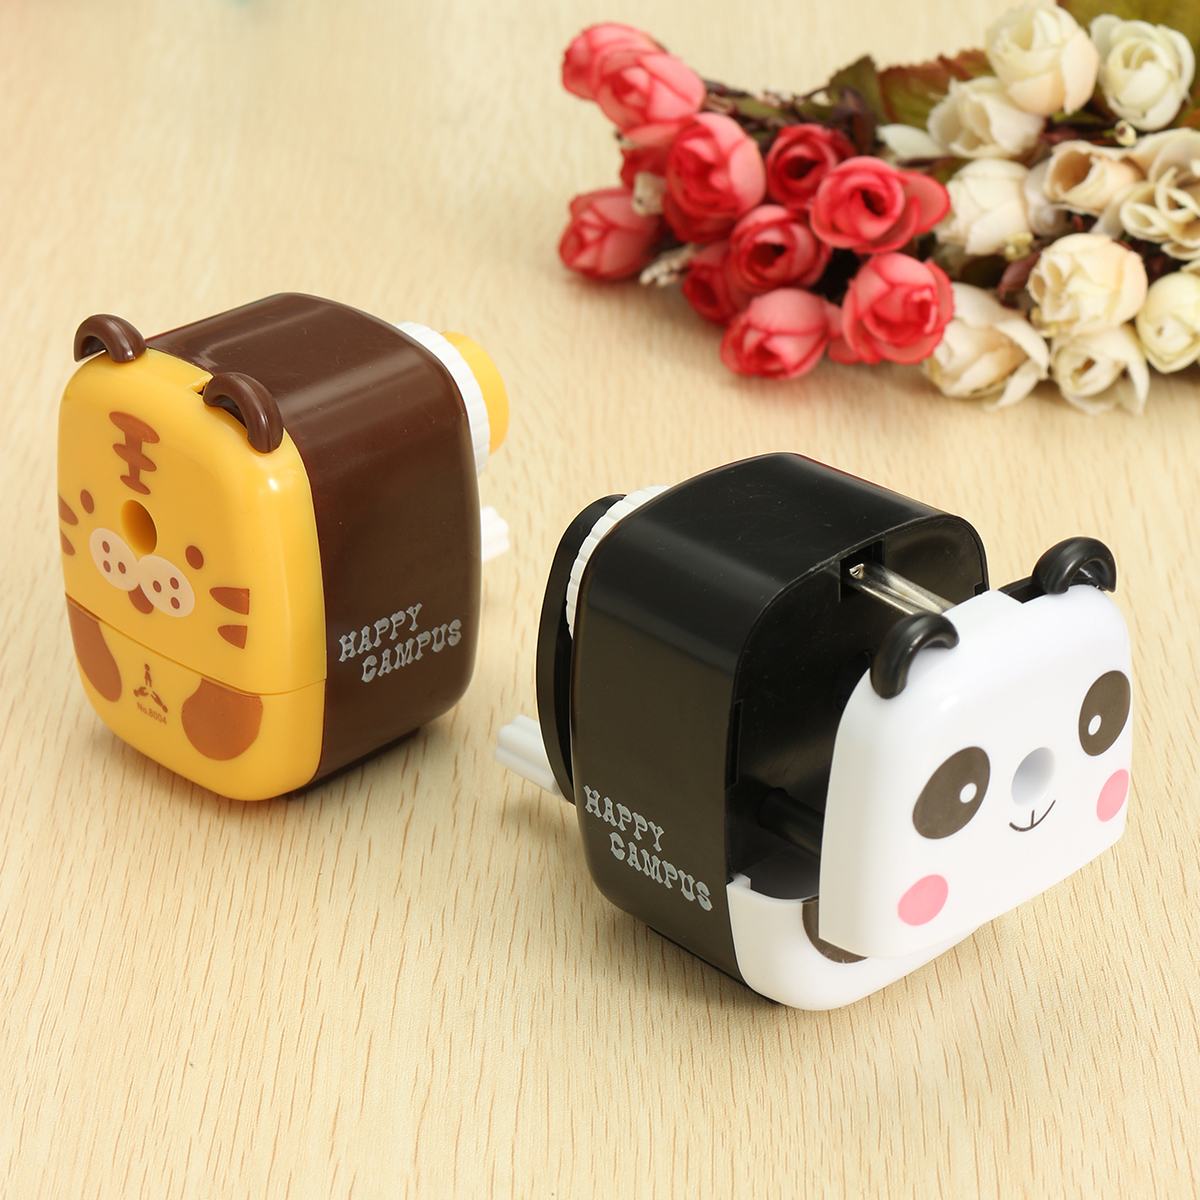 Practical Tiger Panda Animal Shaped Mini Manual Pencil Sharpener Gifts Office School Students Stationery Supplies—3